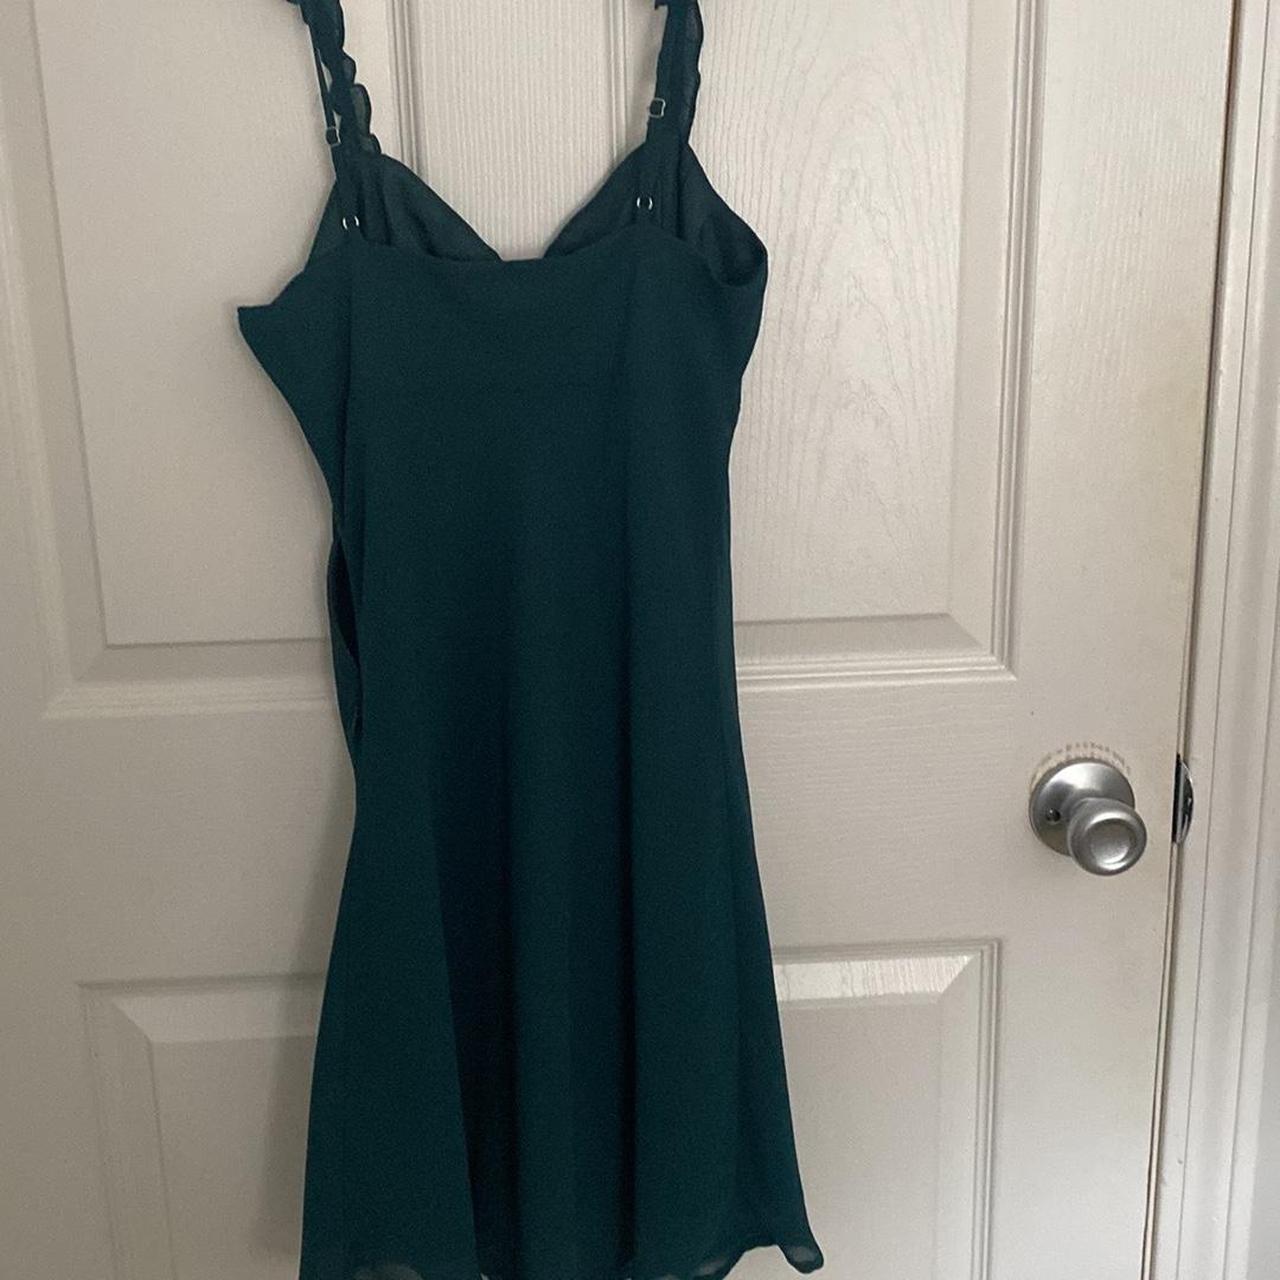 UO forest green dress, size small, worn once - great... - Depop